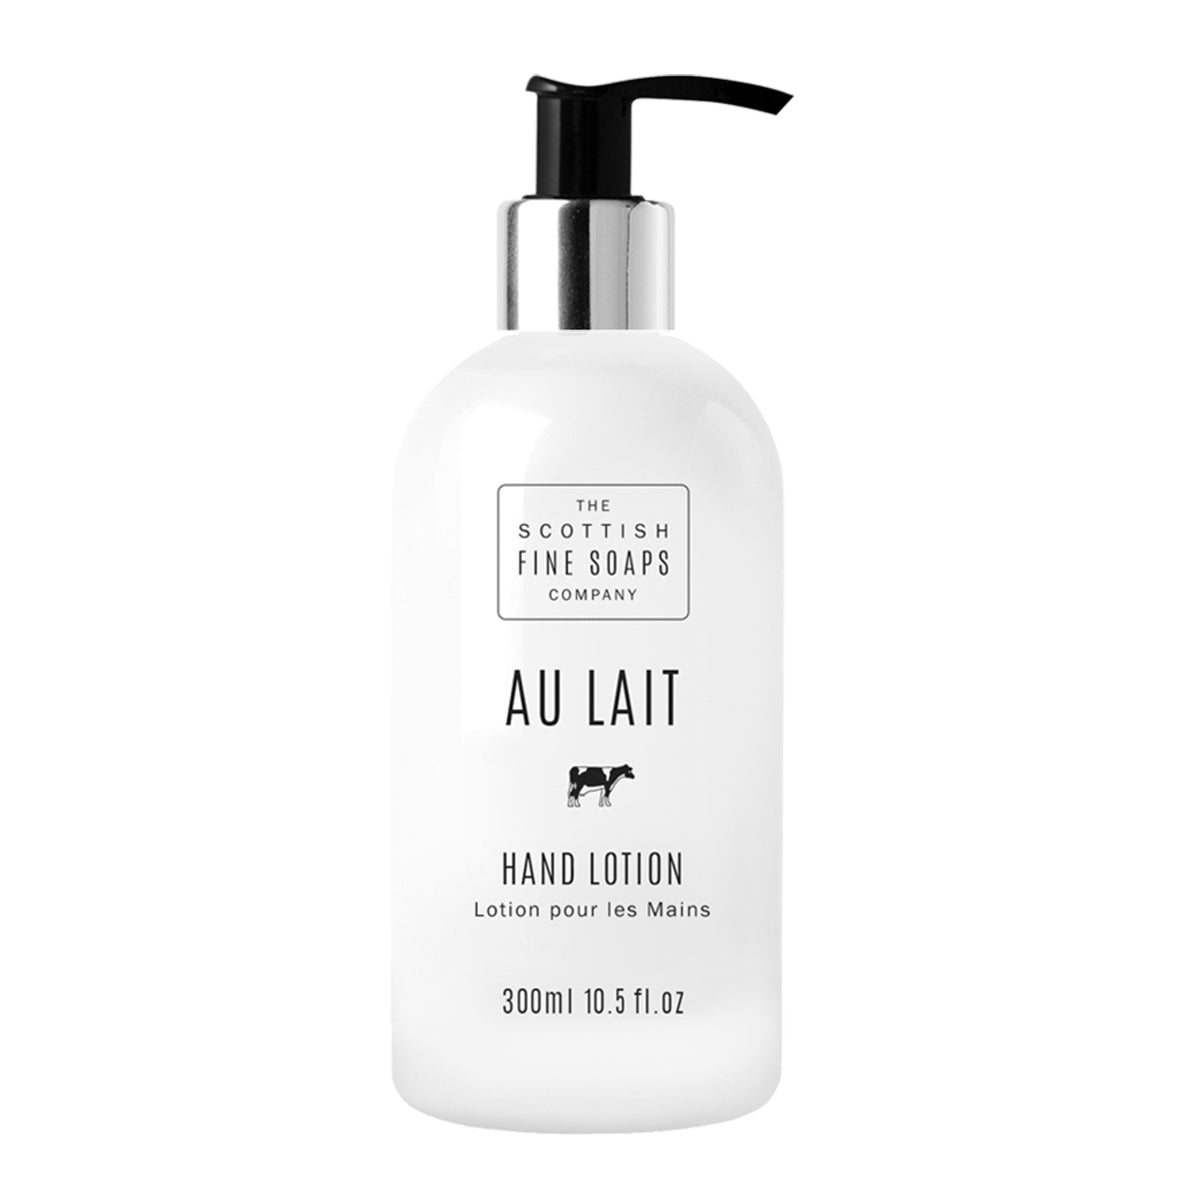 Primary image of Au Lait Hand Lotion